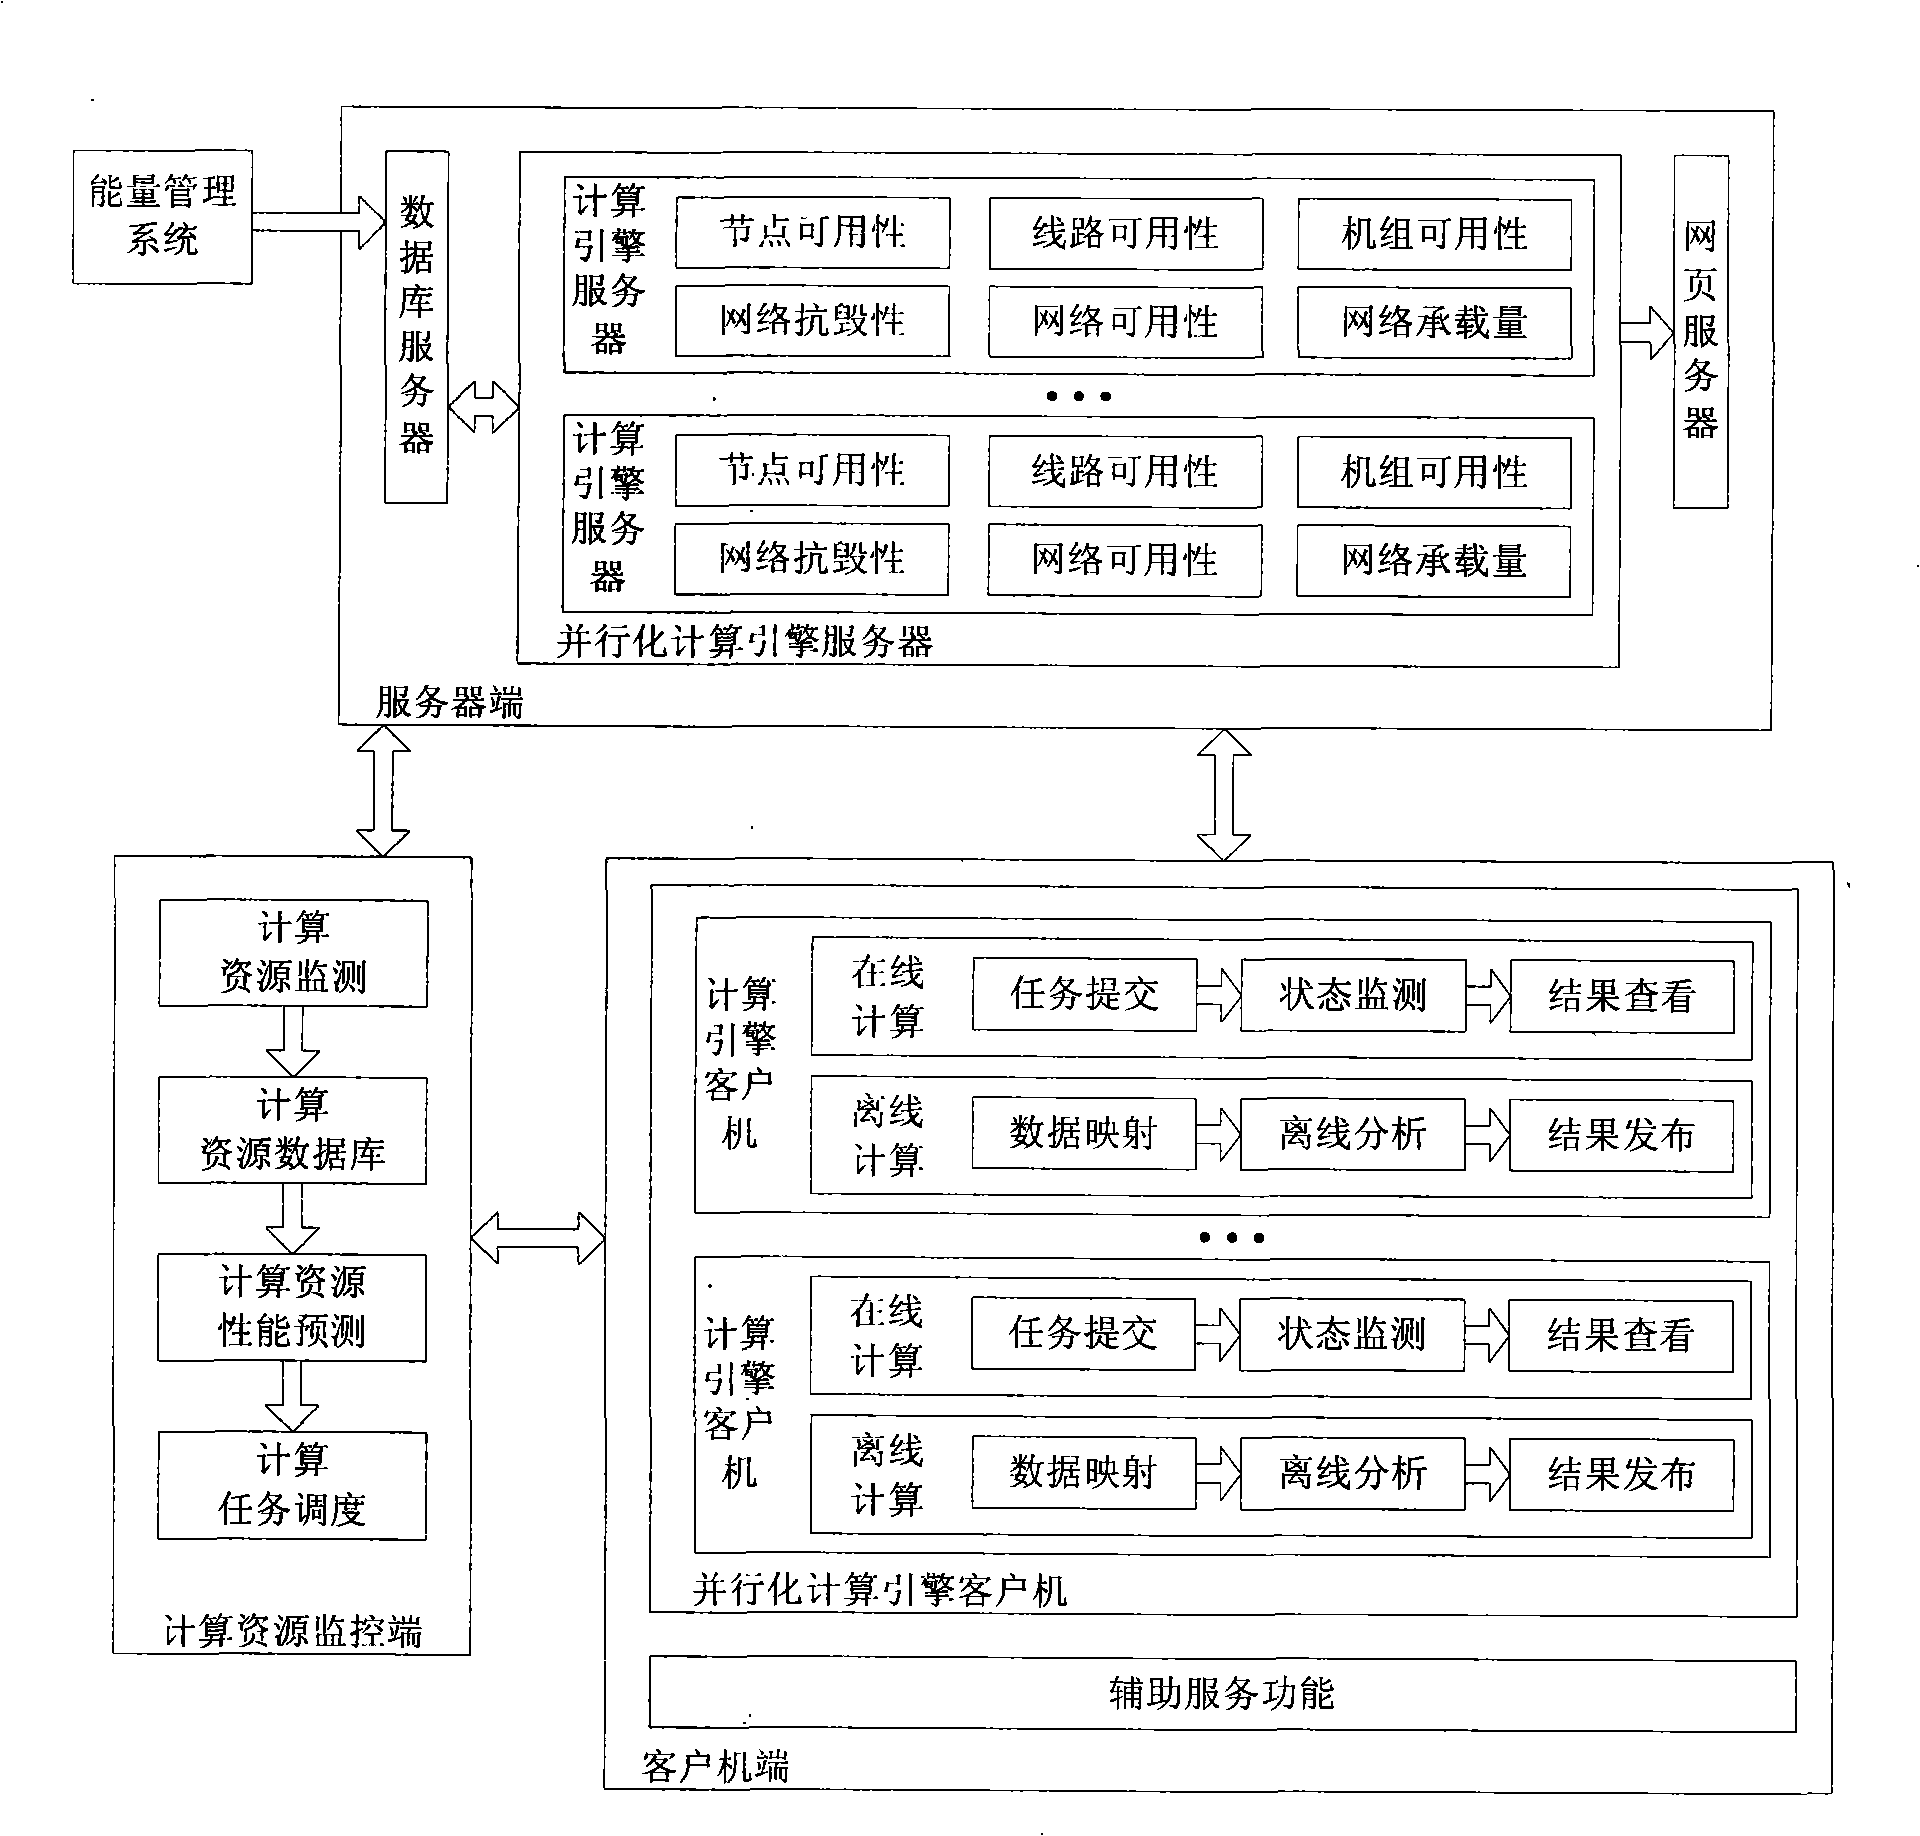 Scalable distributed system supporting dynamic secure estimation and alarm of a power system